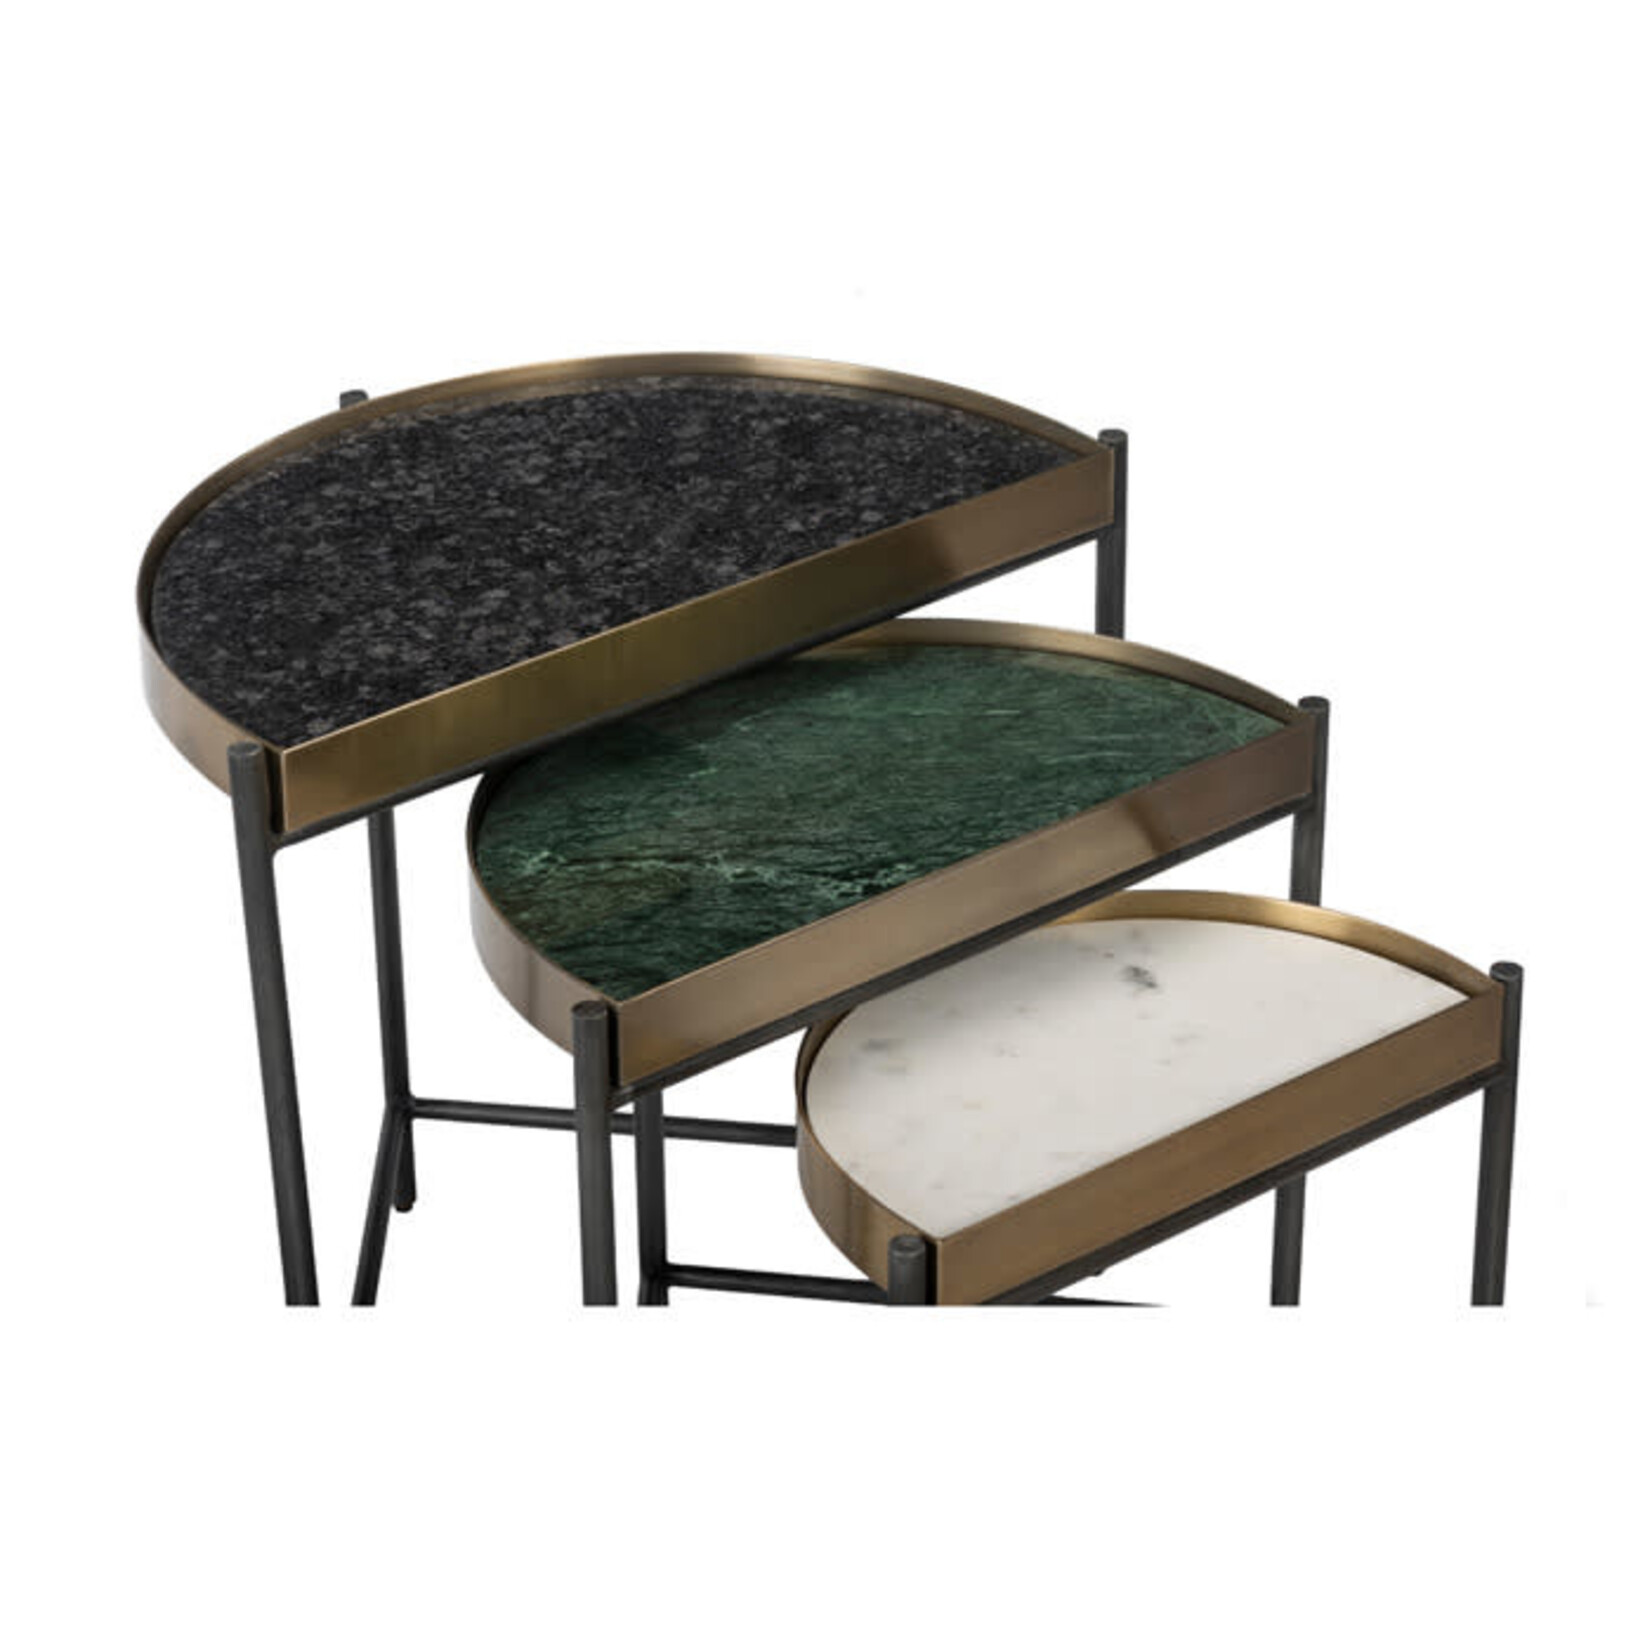 Union Home LLC Demi Nesting Marble Top Table Med - Sold Separately